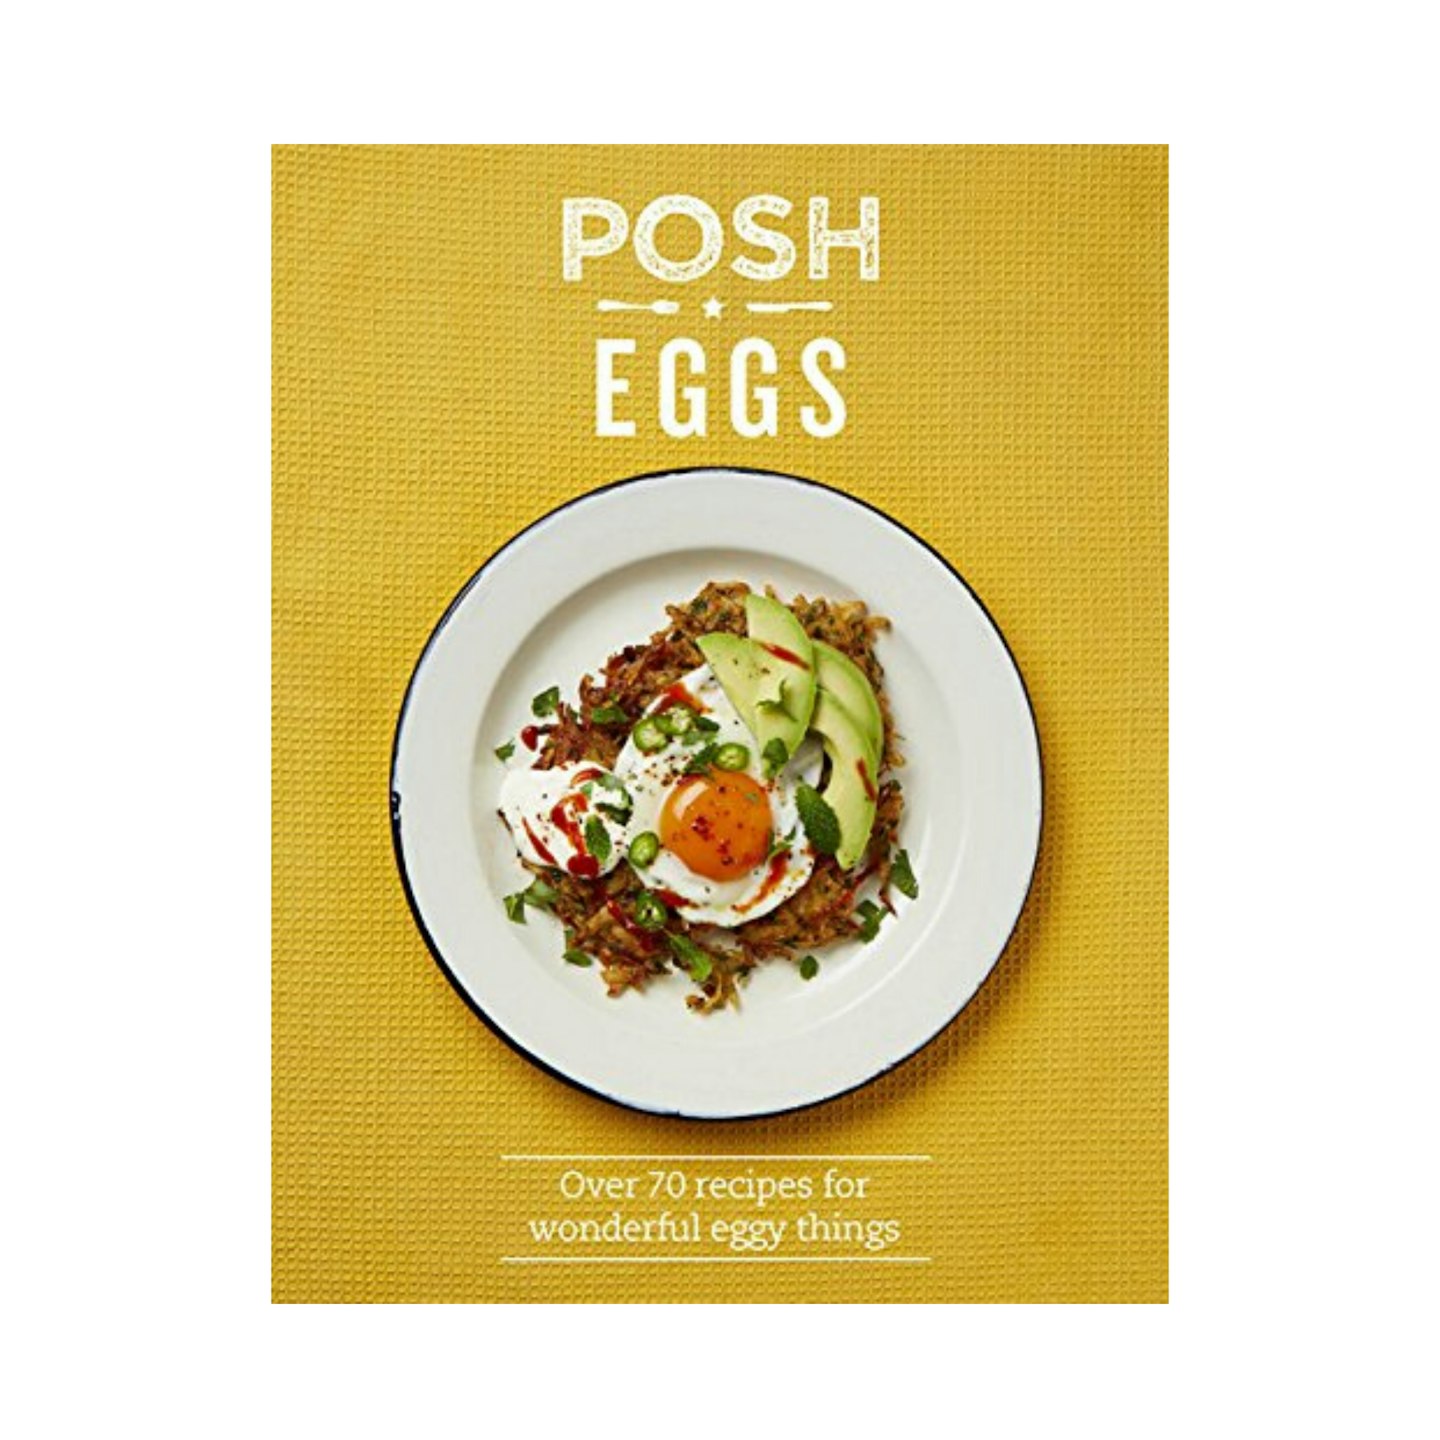 Posh Eggs: Over 70 Recipes for wonderful eggy things